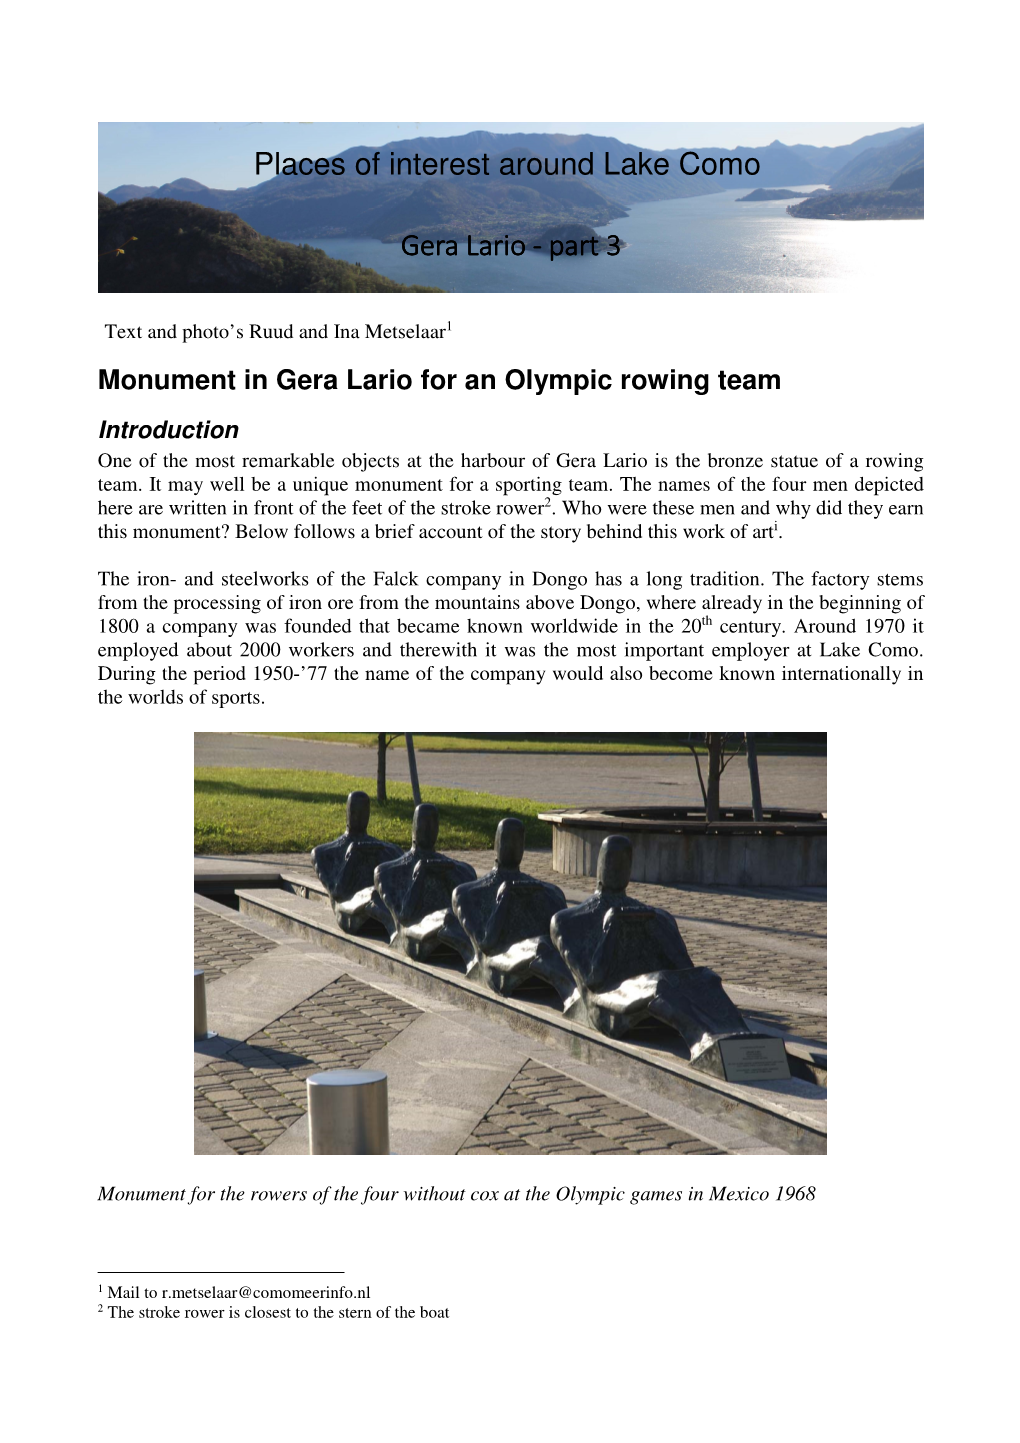 Monument in Gera Lario for an Olympic Rowing Team